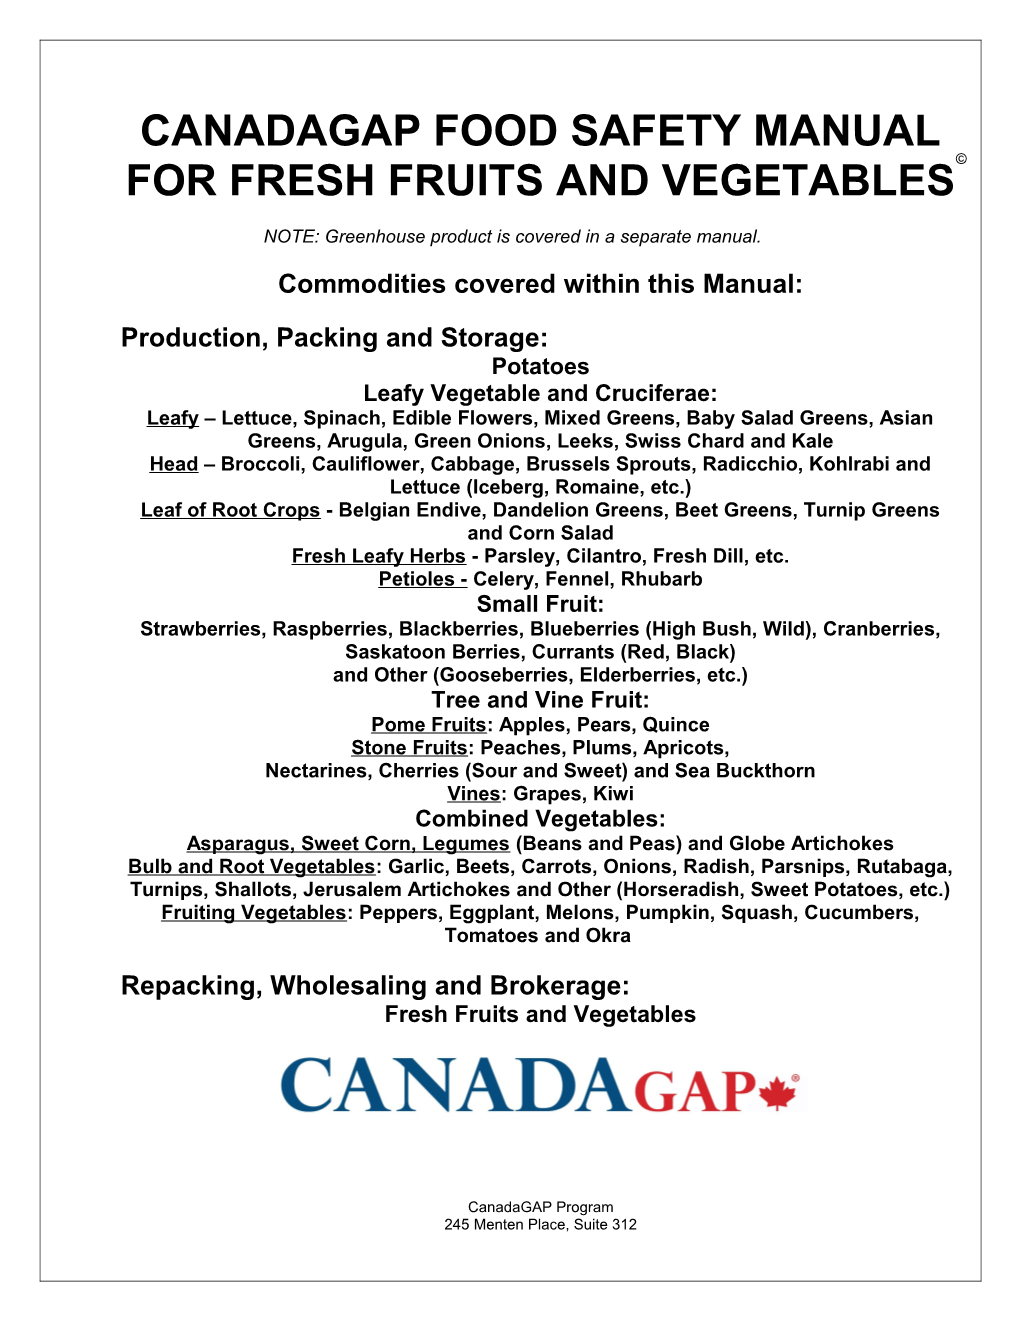 Canadagap Fruit and Vegetable Manual ENG